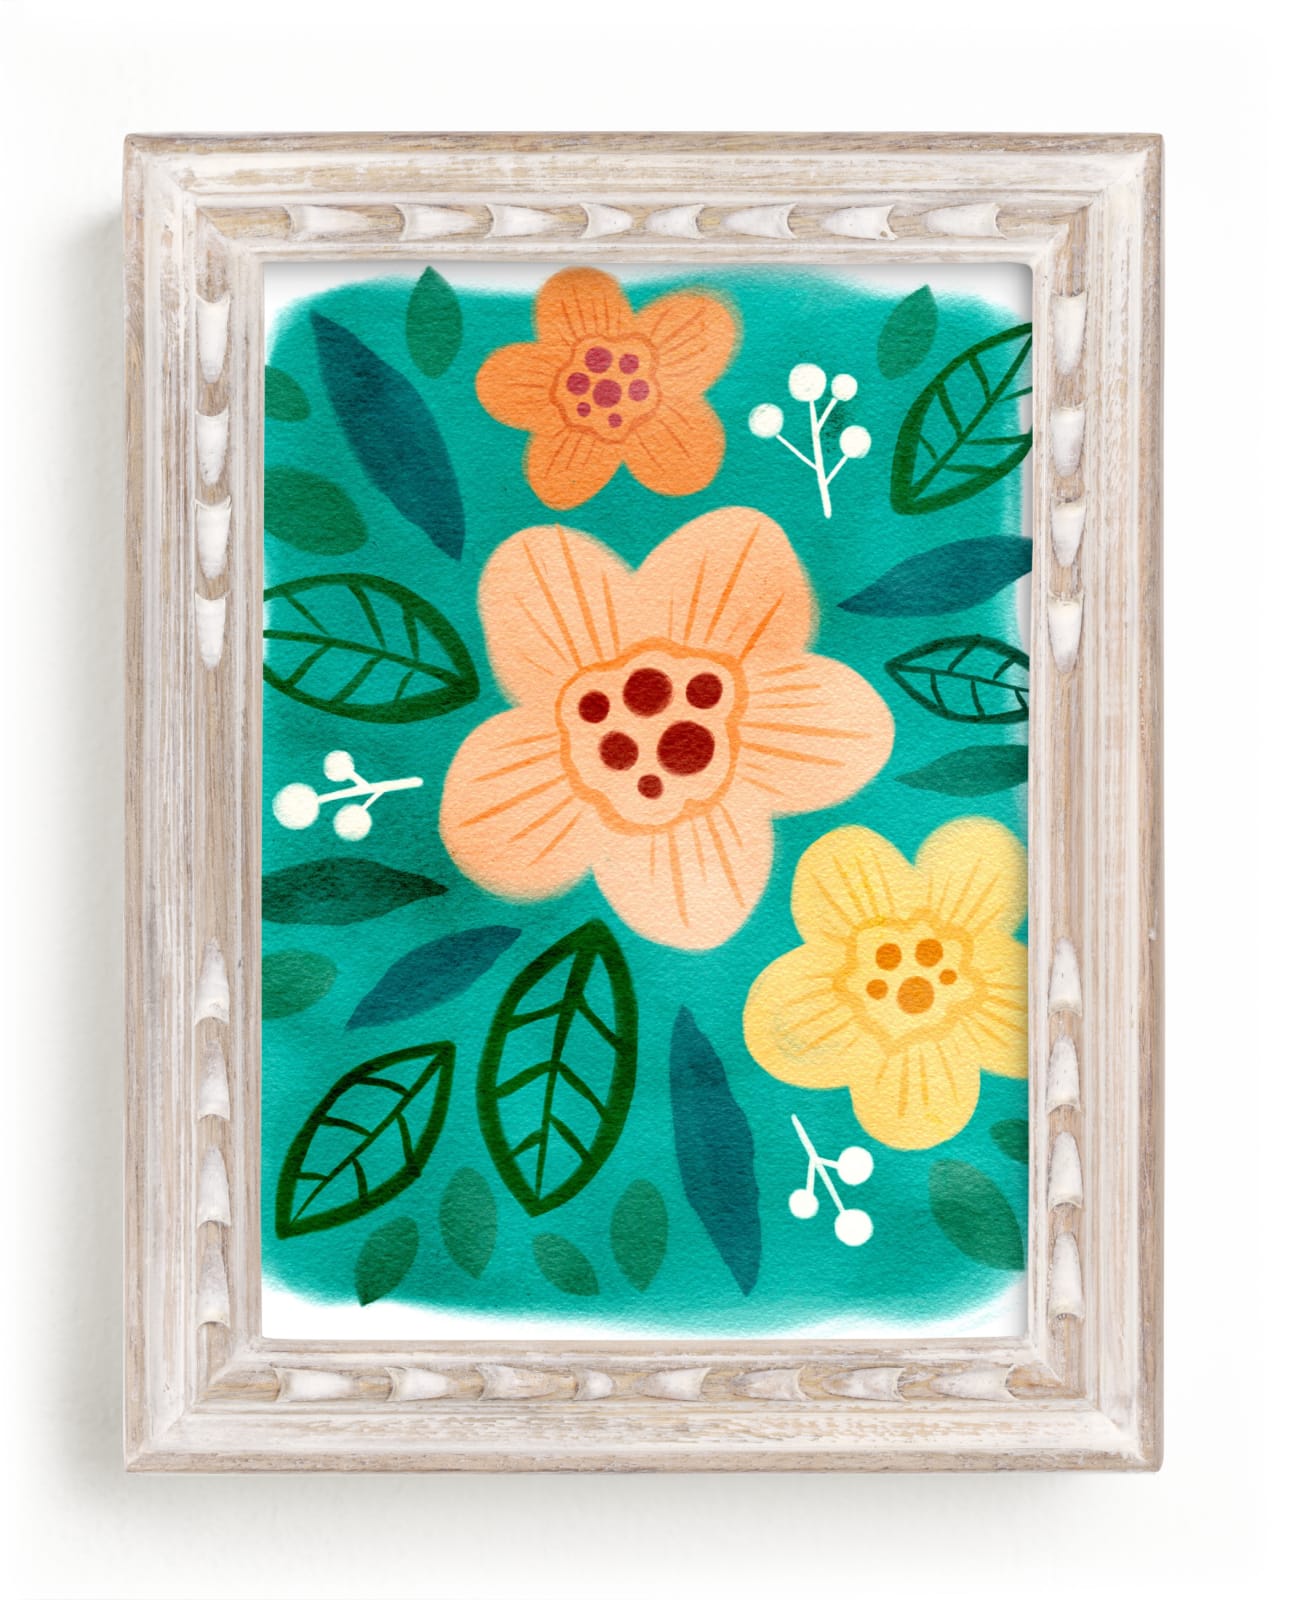 "Late Summer blooms" by Charla Pettingill in beautiful frame options and a variety of sizes.